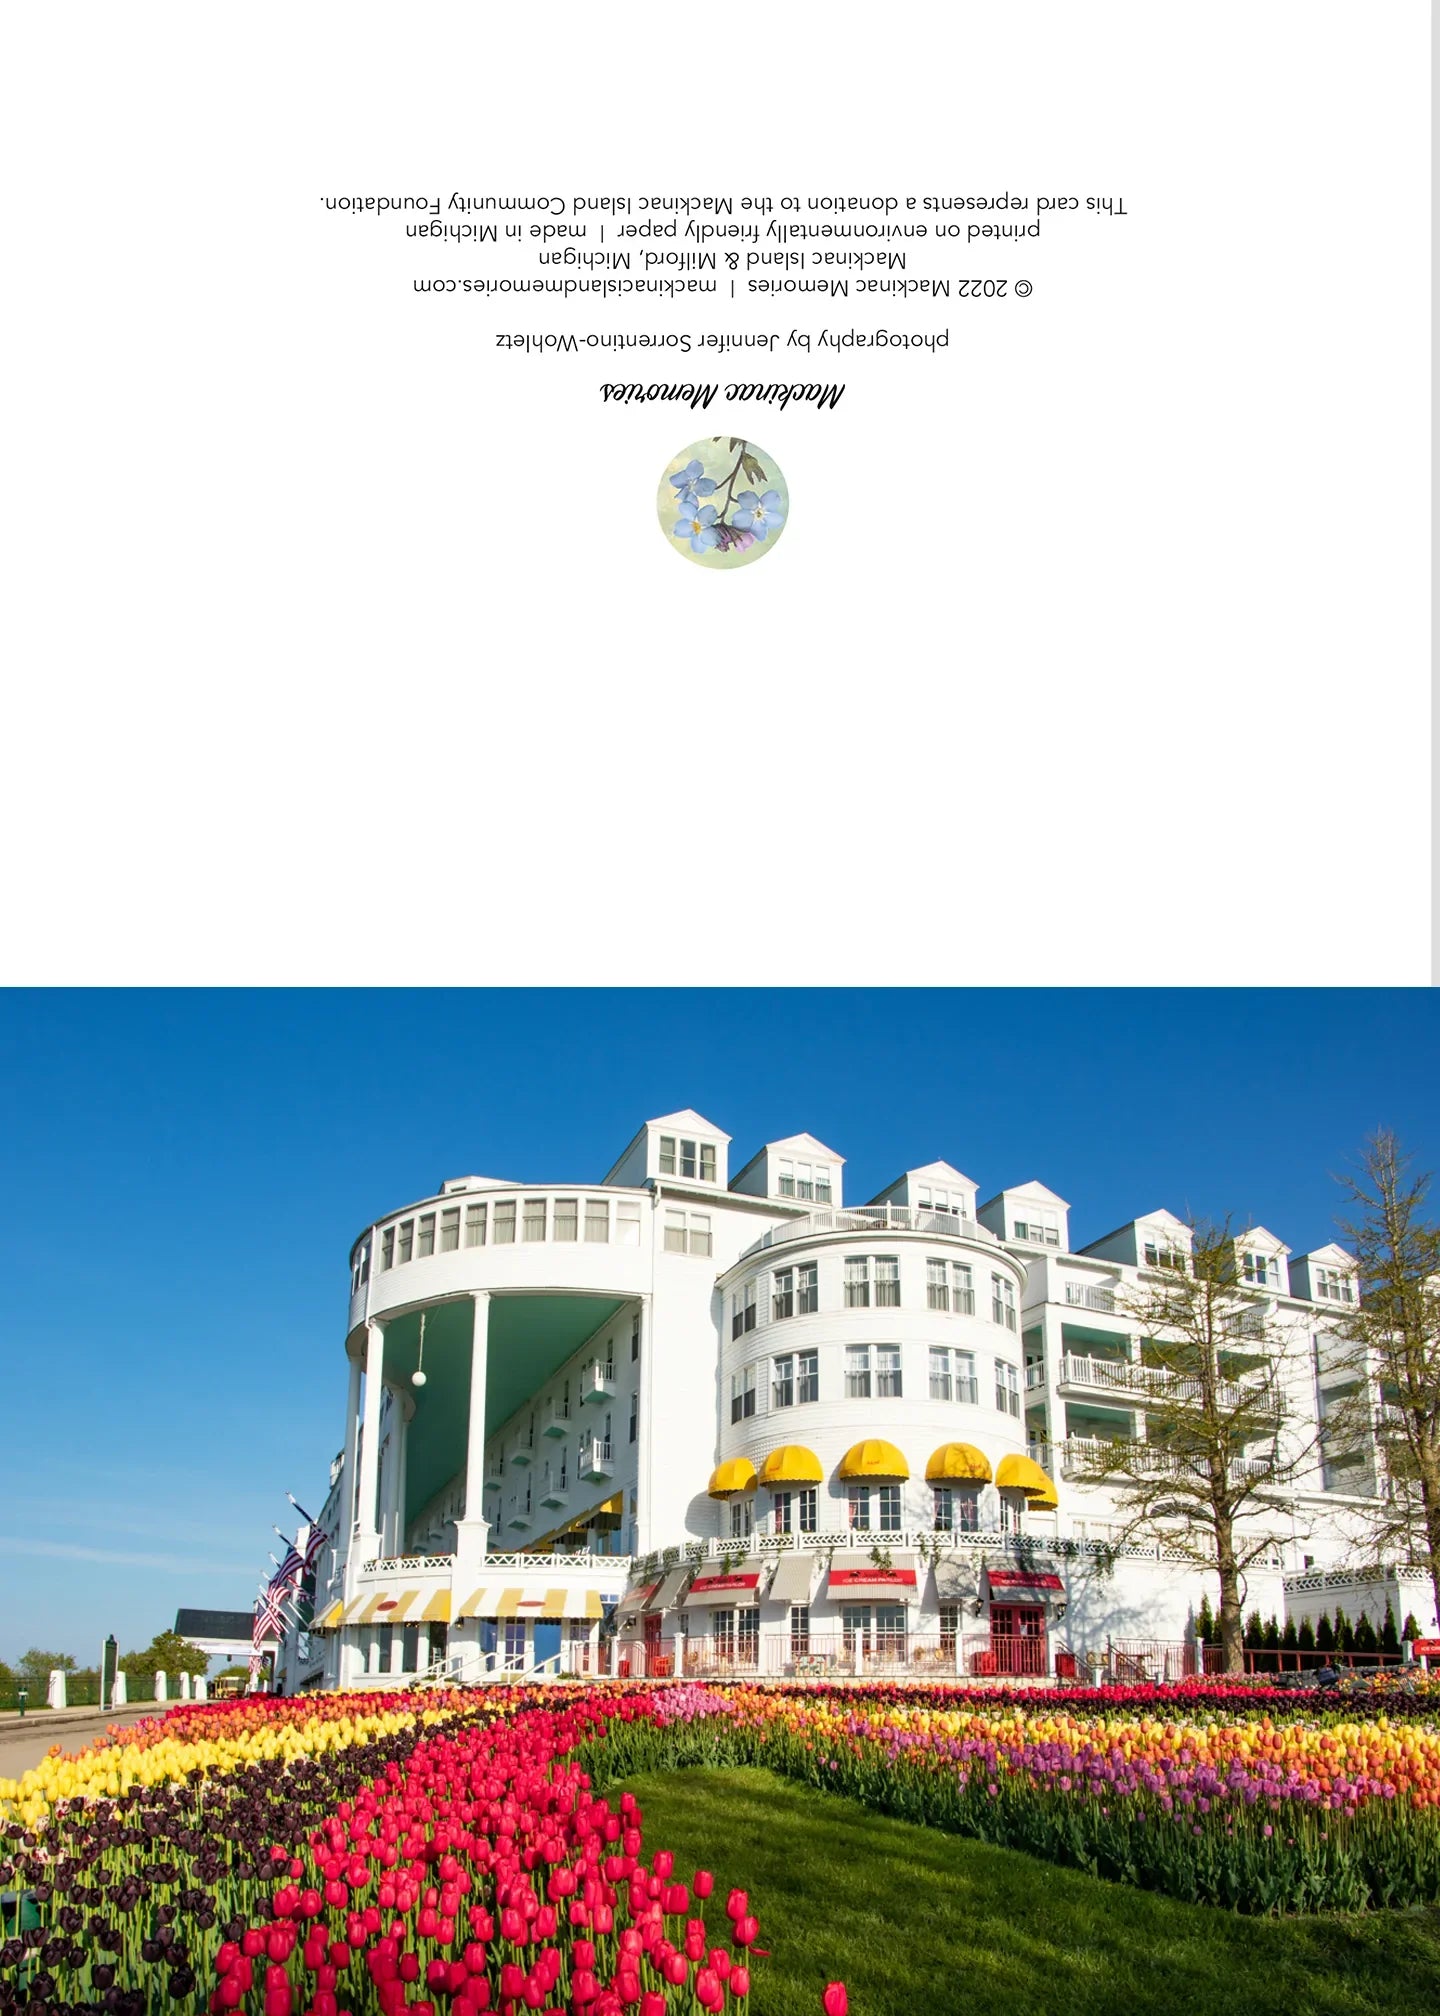 Blank greeting card featuring a photograph of Grand Hotel by local artist Jennifer Wohletz of Mackinac Memories. 